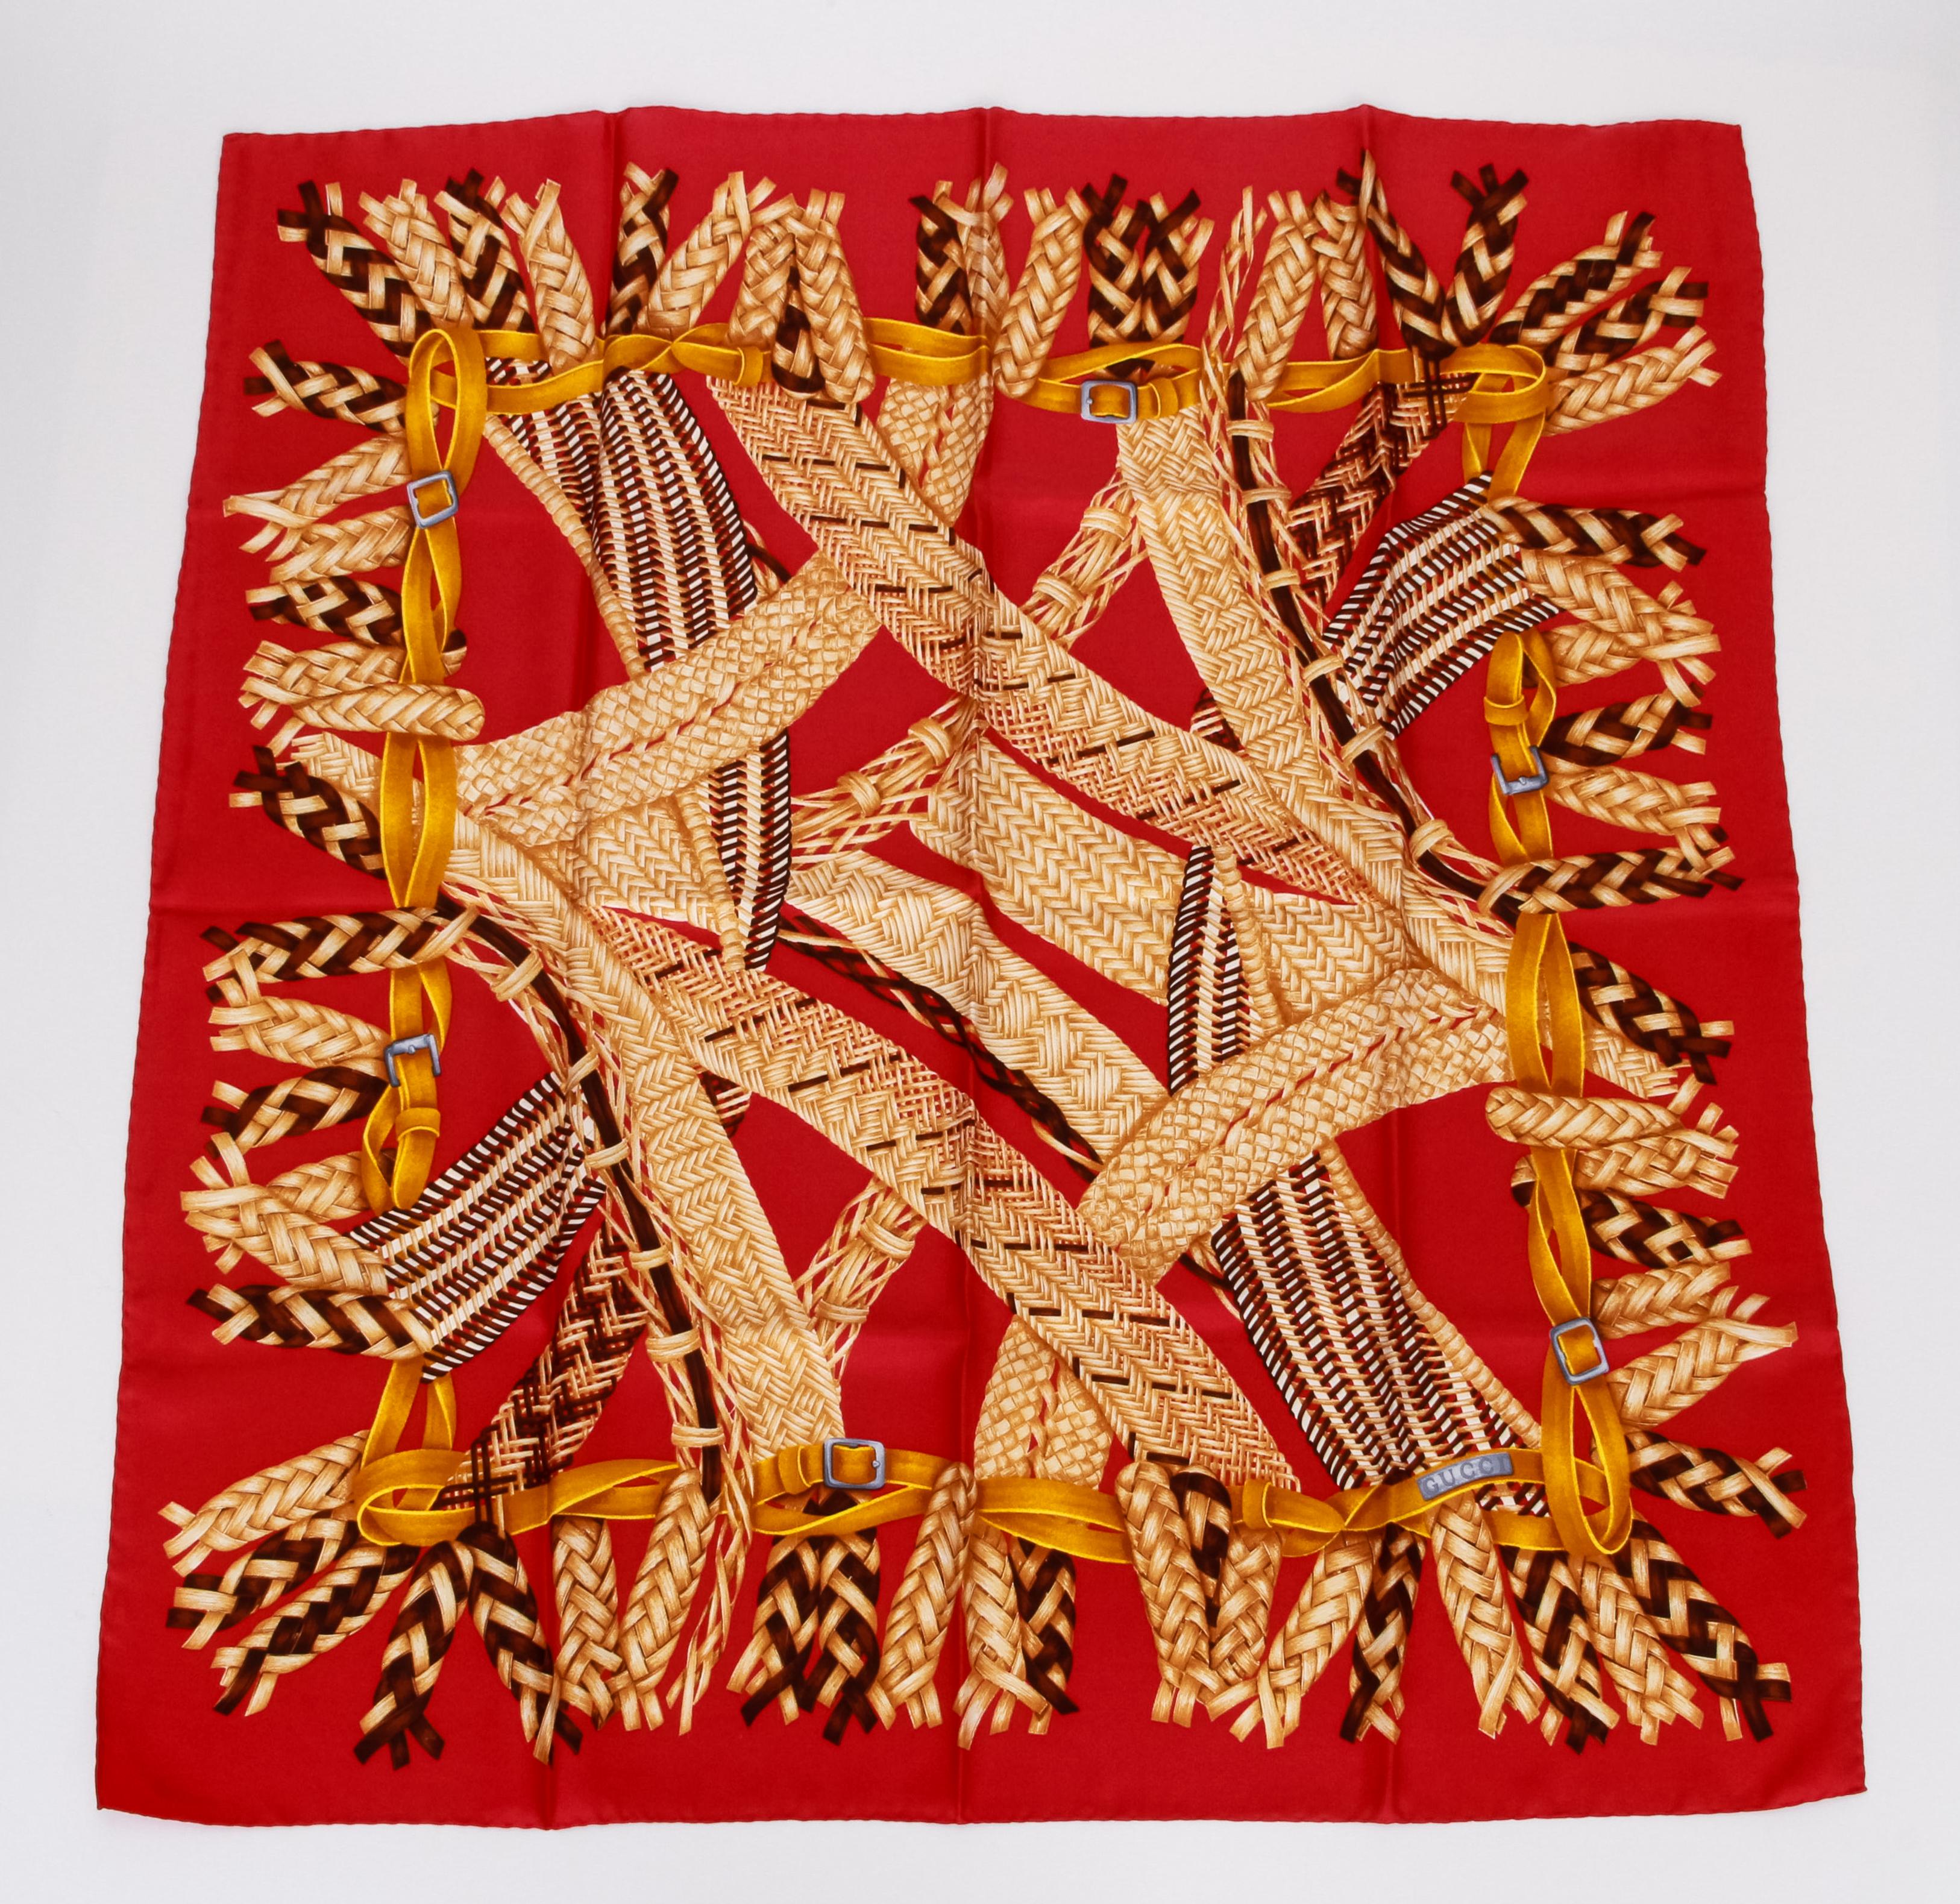 Gucci red silk scarf with straw design. Hand rolled edges.
35